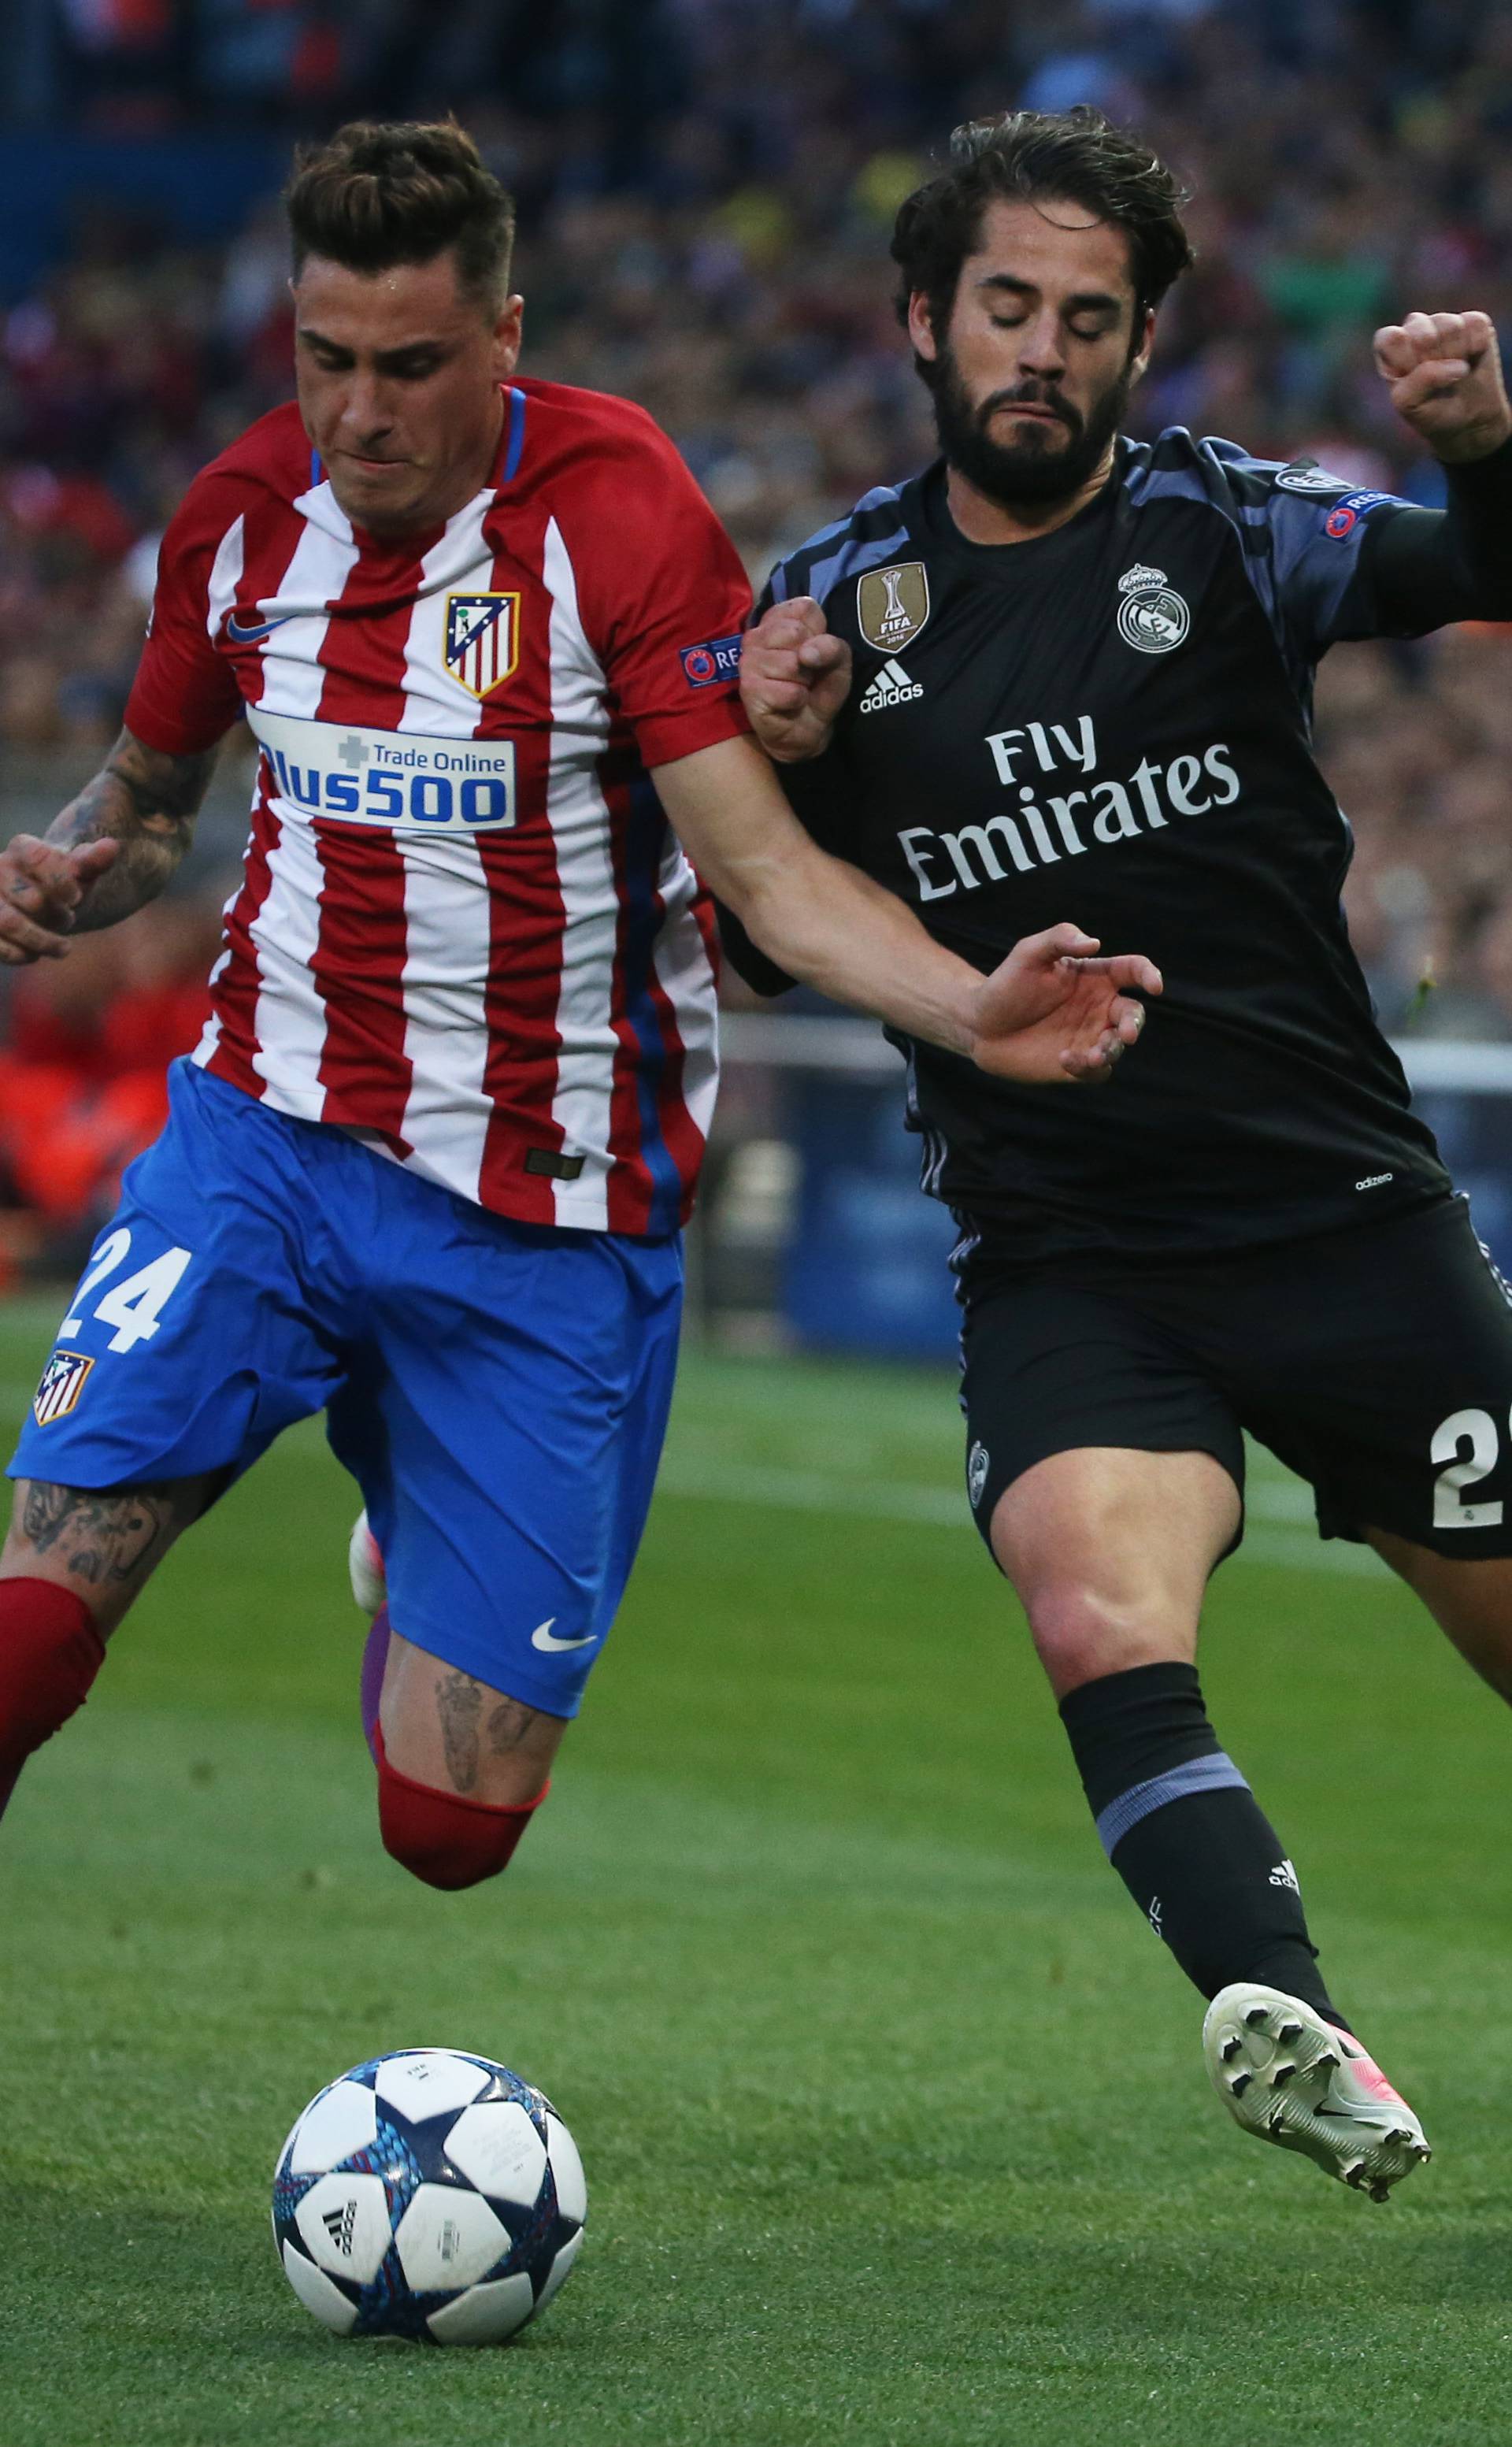 Atletico Madrid's Jose Gimenez in action with Real Madrid's Isco